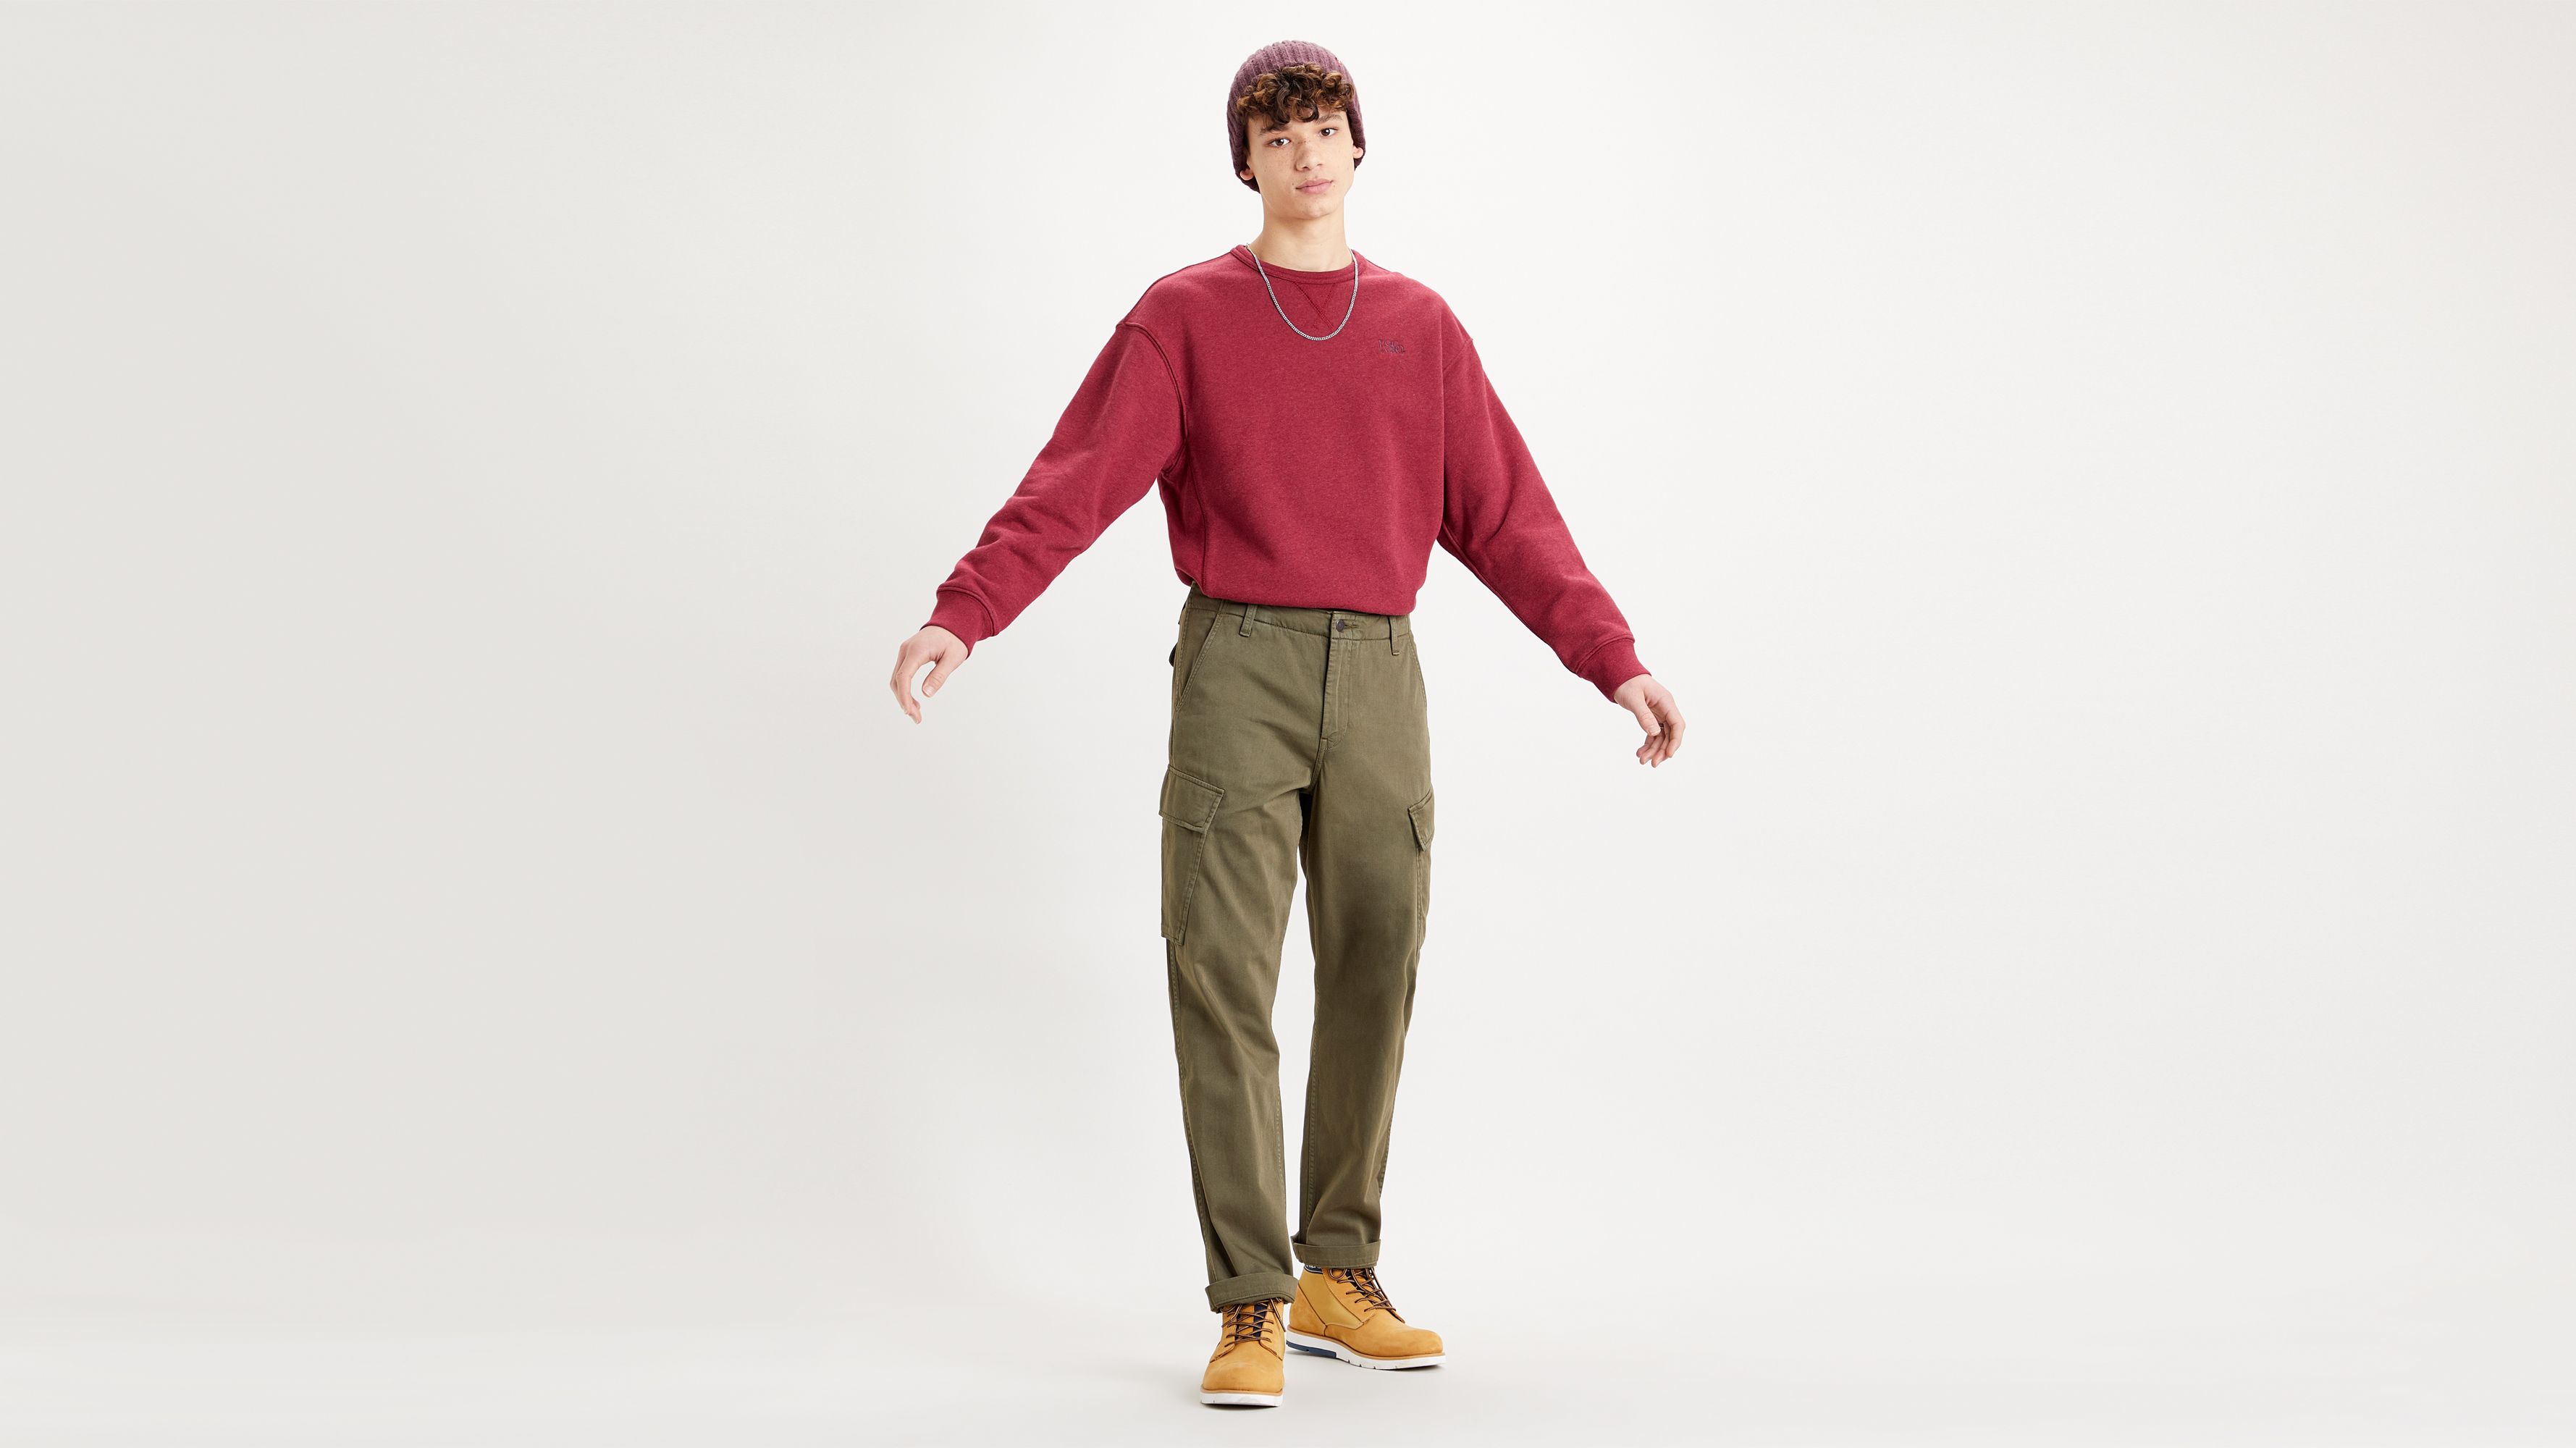 levi's tapered cargo pants